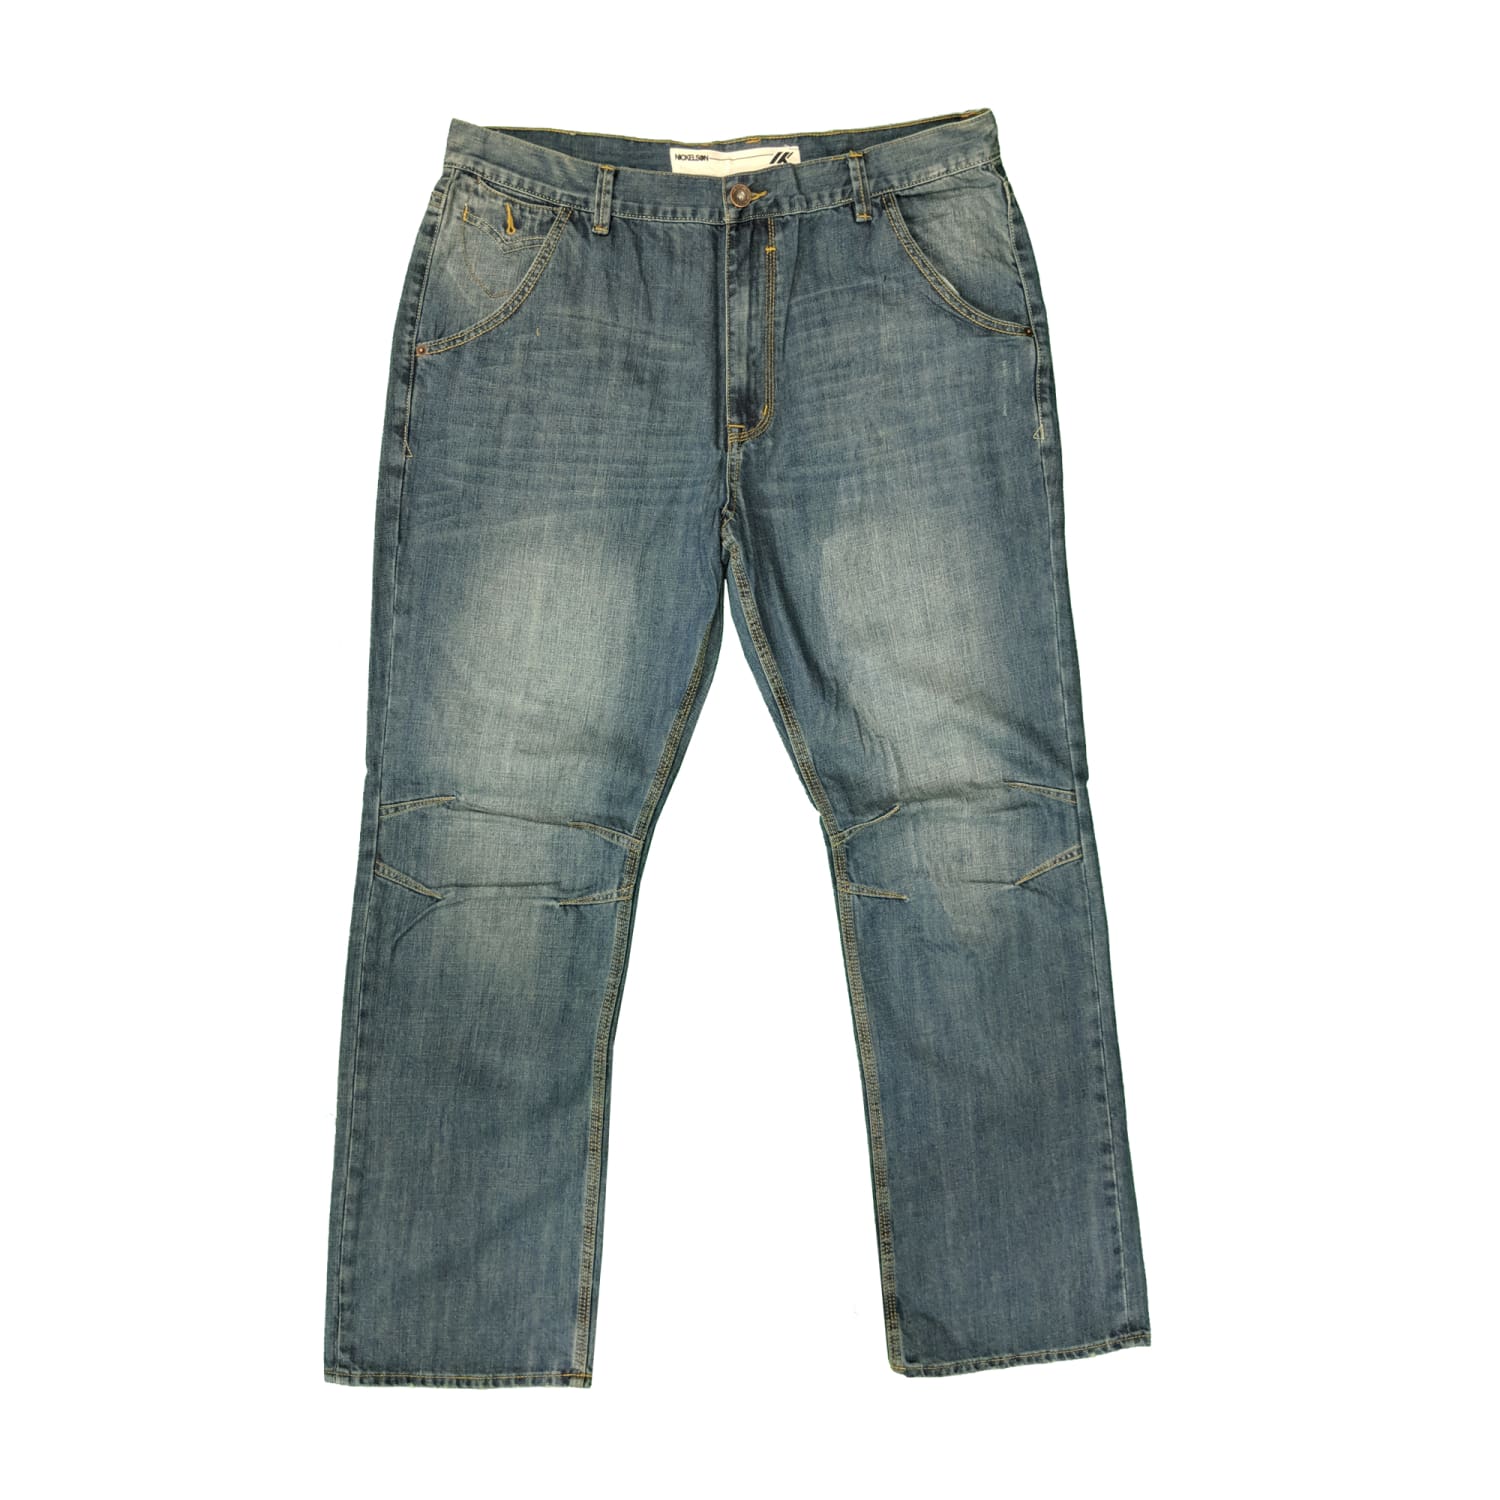 Nickelson Jeans - NMB511 - Used Wash 1